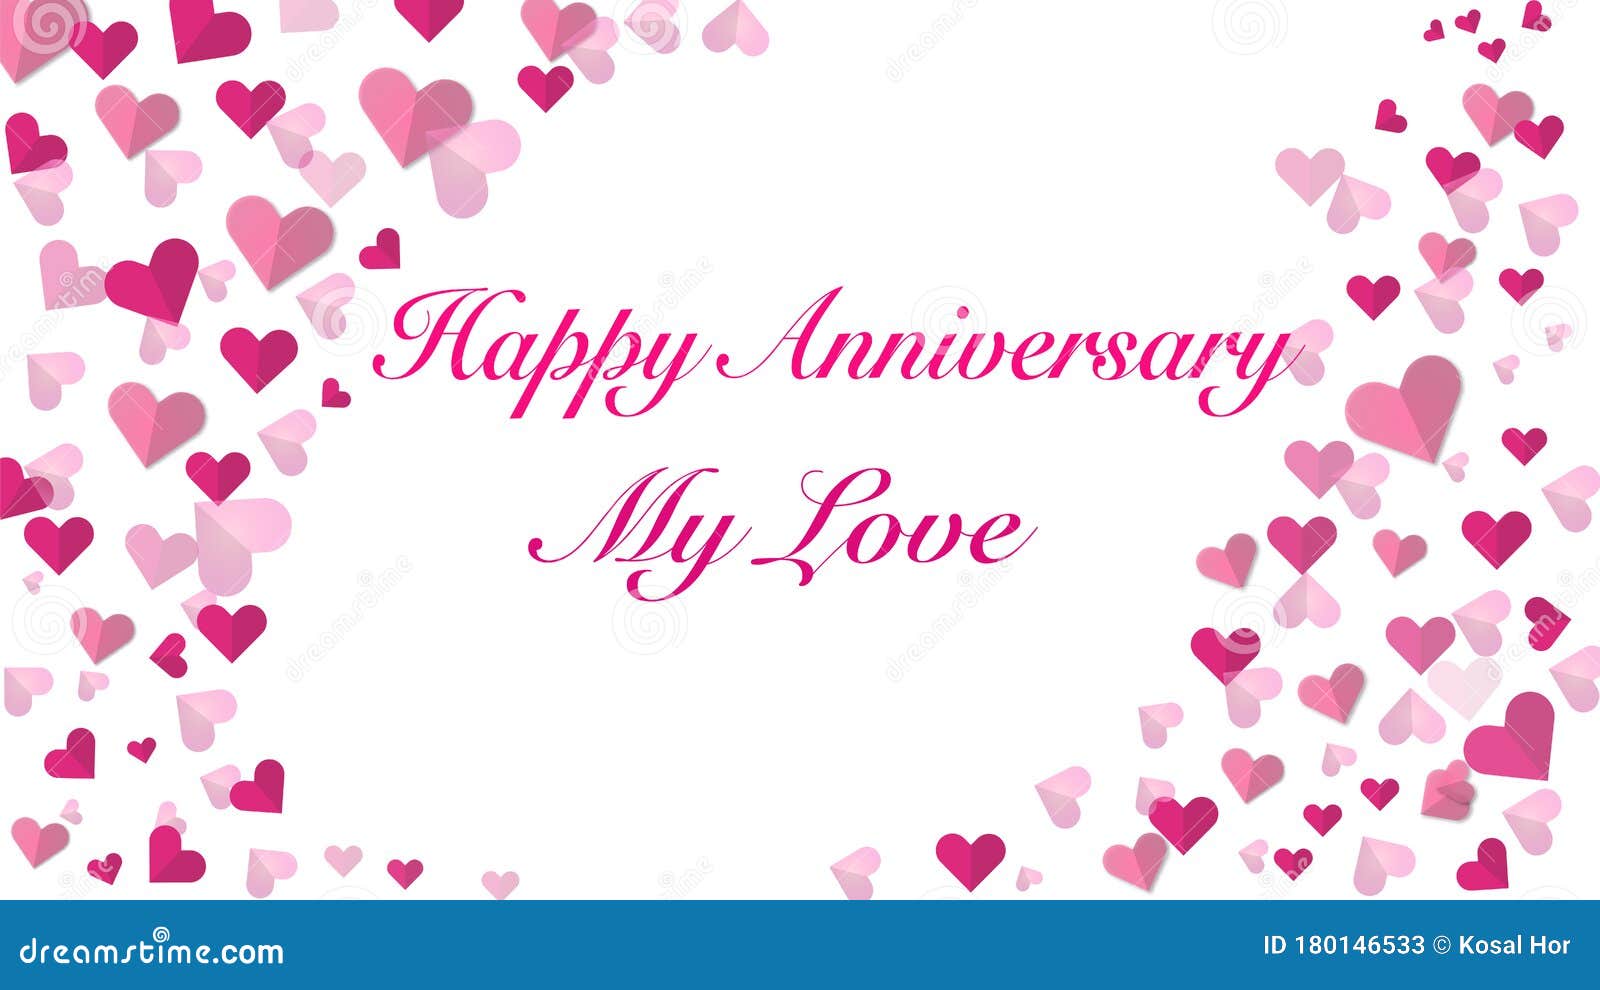 Transparent Love Vector PNG Images Love Pappercut Transparant Background  Vector Birthday Vector Anniversary Images Vector Anniversary Background  Free Download PNG Image For Free Download